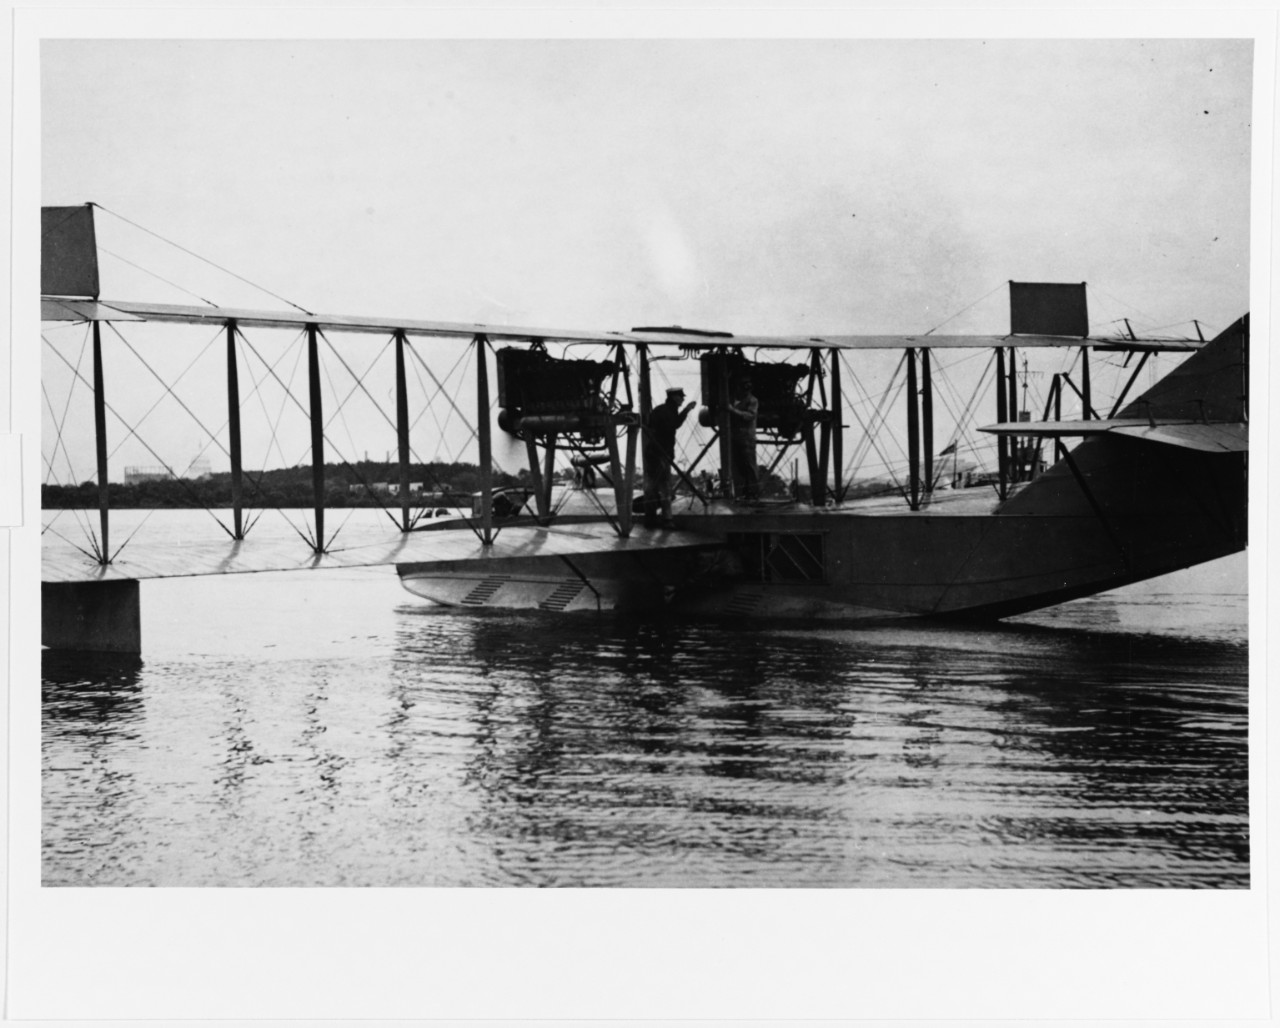 Curtiss H-16 flying boat